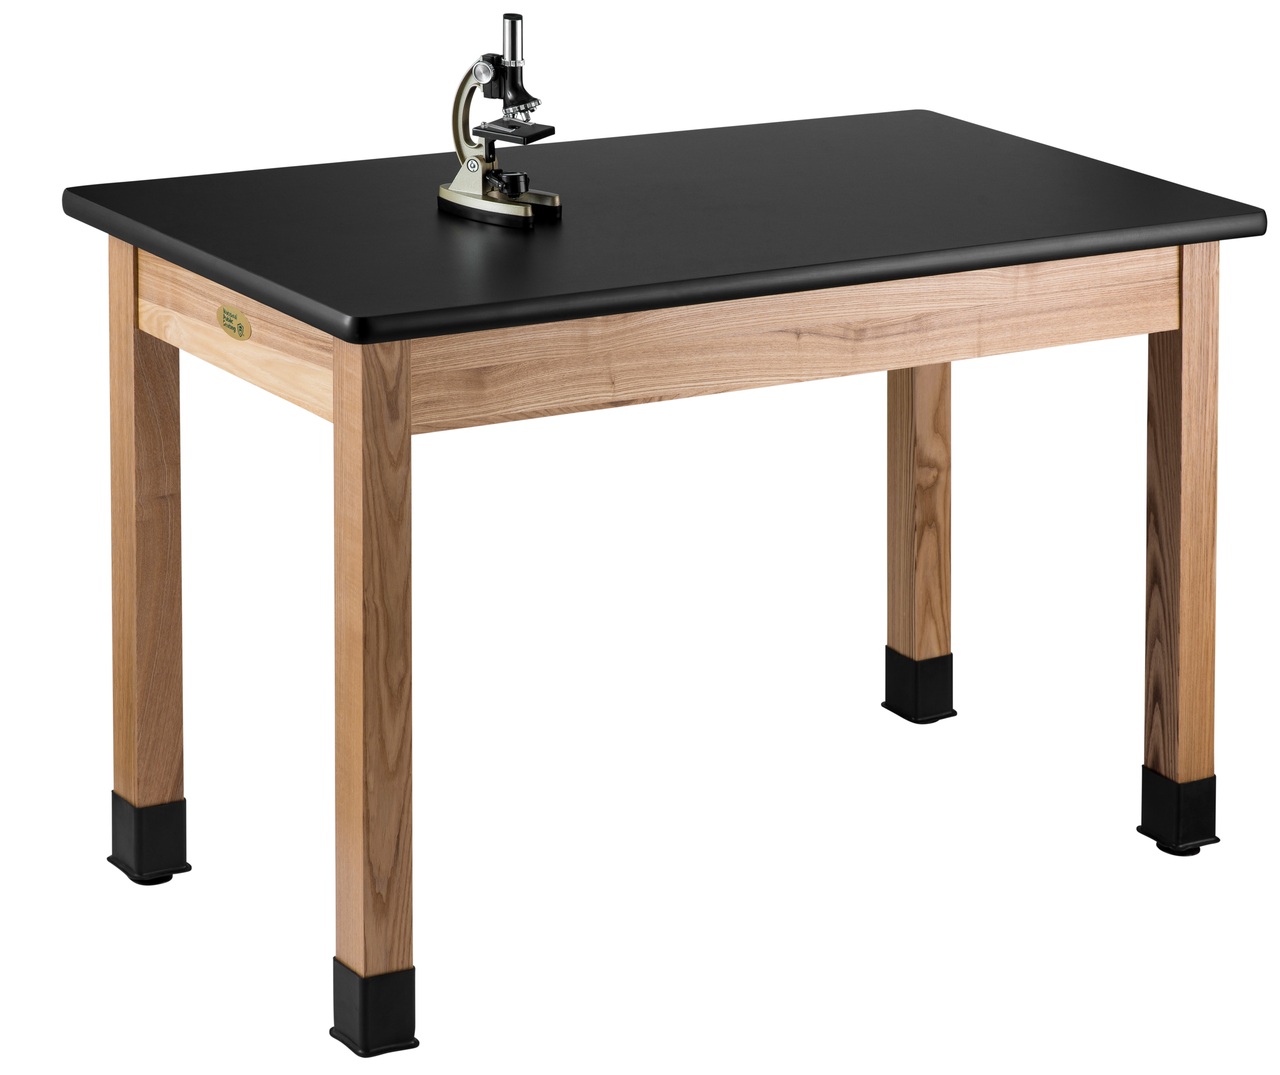 NPS Wood Science Lab Table -  24"x72"x30" -  HPL Top - Black Top and Ash Leg